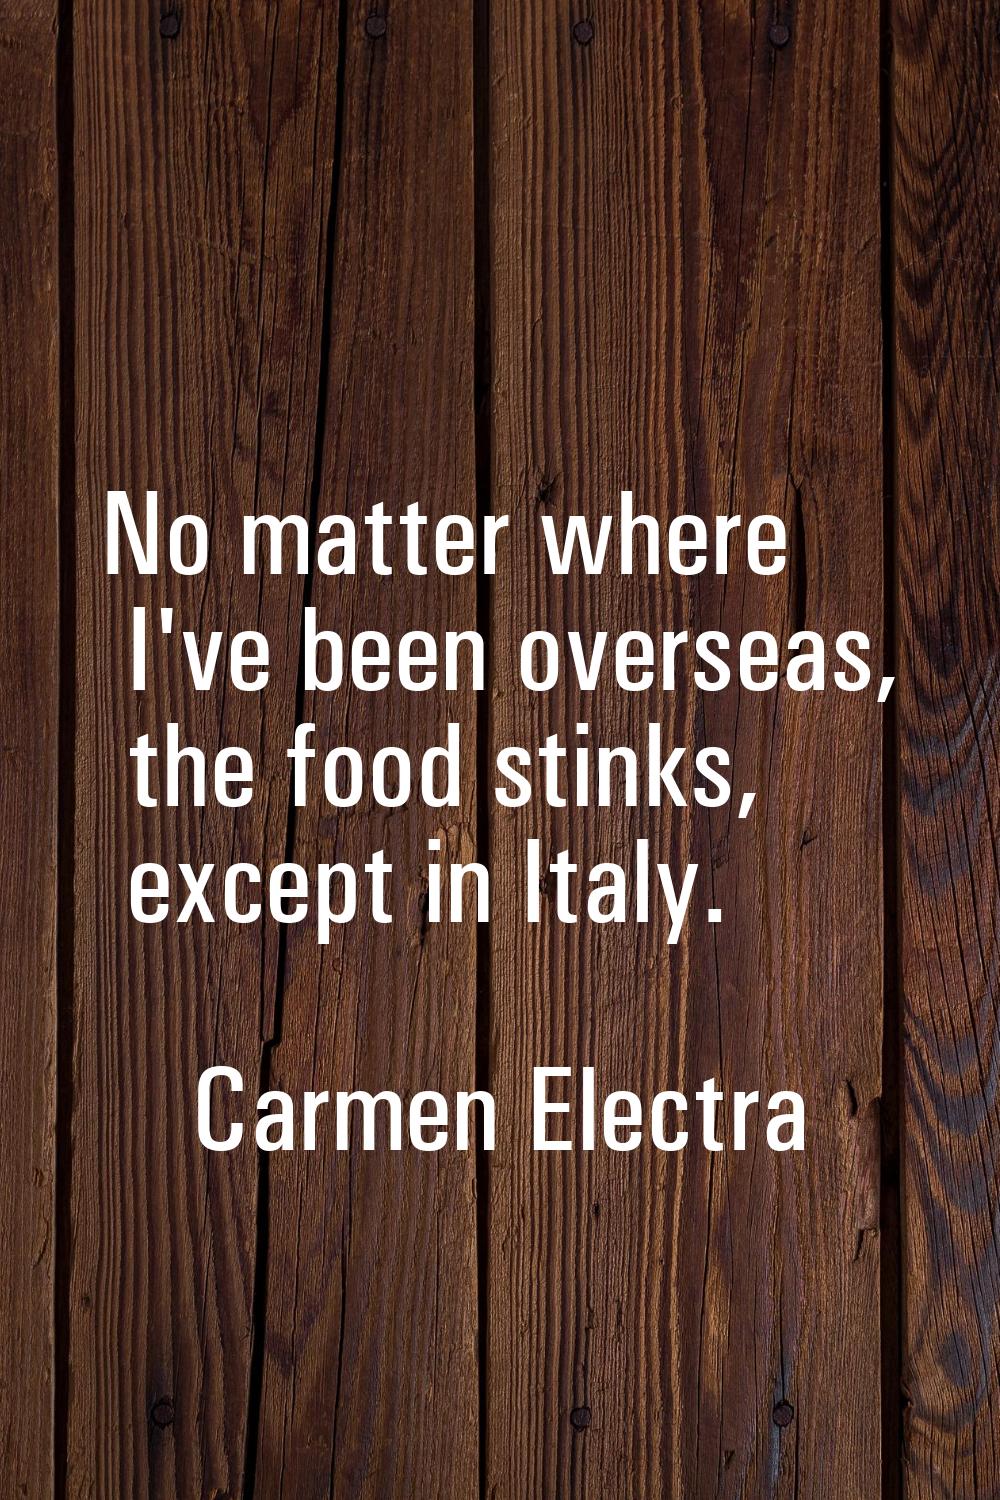 No matter where I've been overseas, the food stinks, except in Italy.